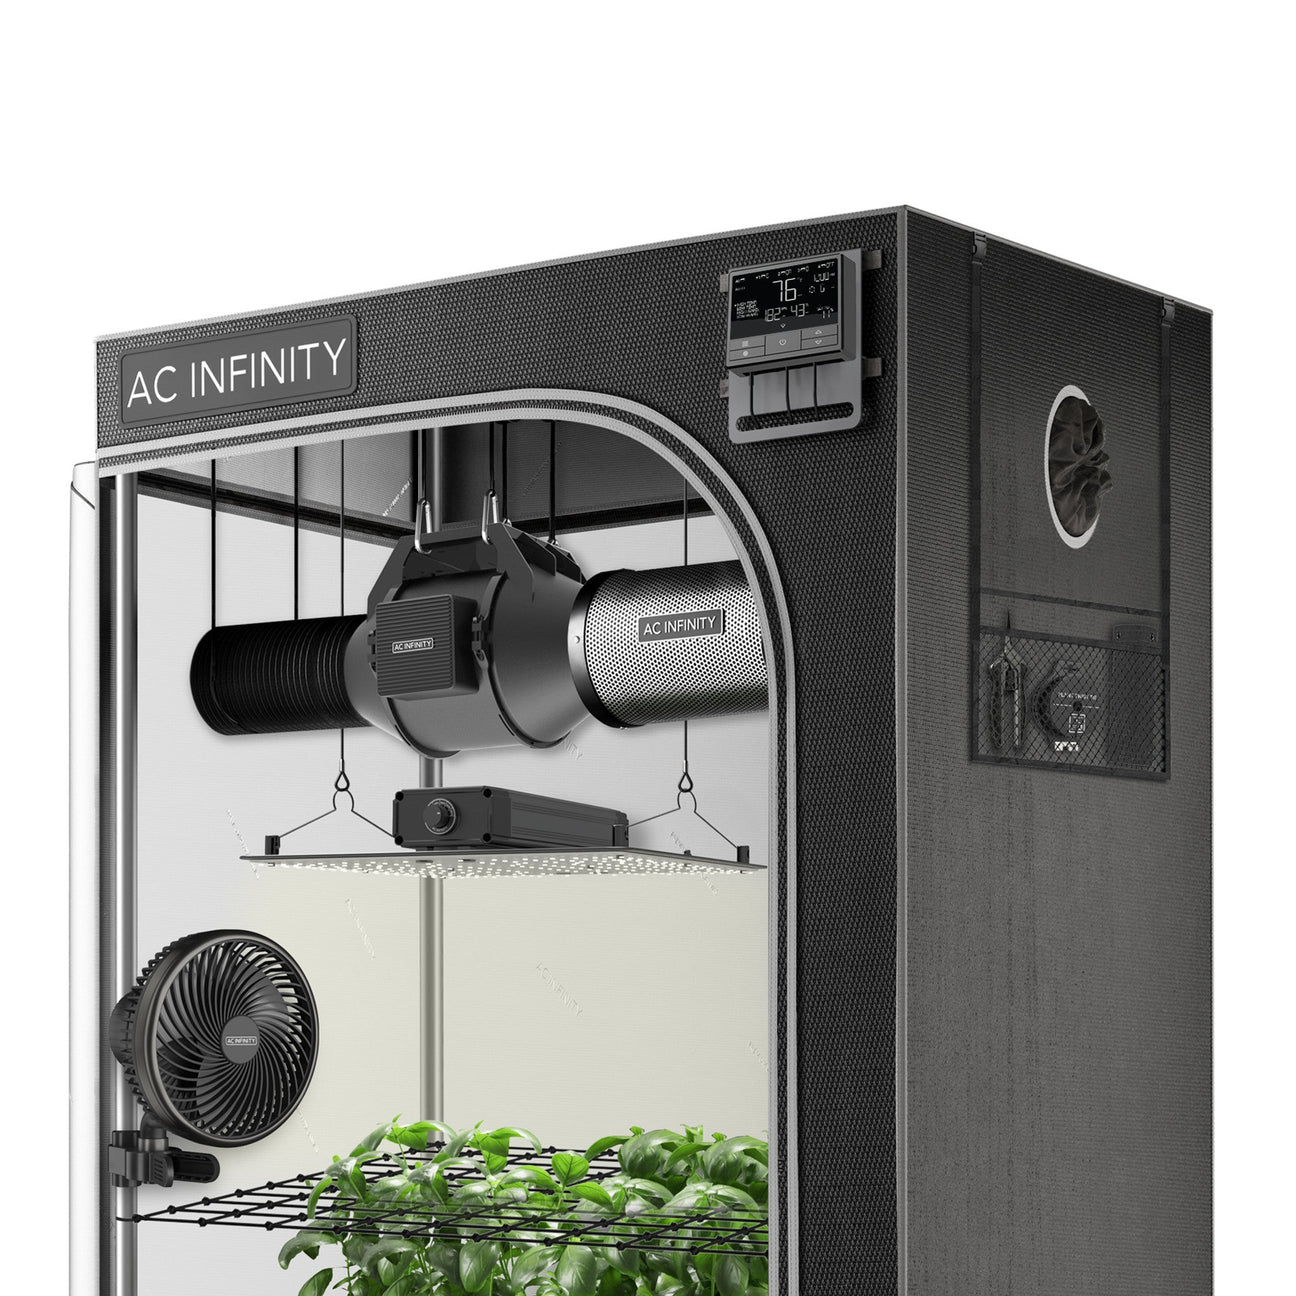 AC Infinity ADVANCE GROW TENT SYSTEM COMPACT 2X2, 1-PLANT KIT, WIFI-INTEGRATED CONTROLS TO AUTOMATE VENTILATION, CIRCULATION, FULL SPECTRUM LED GROW LIGHT - GrowGreen Machines